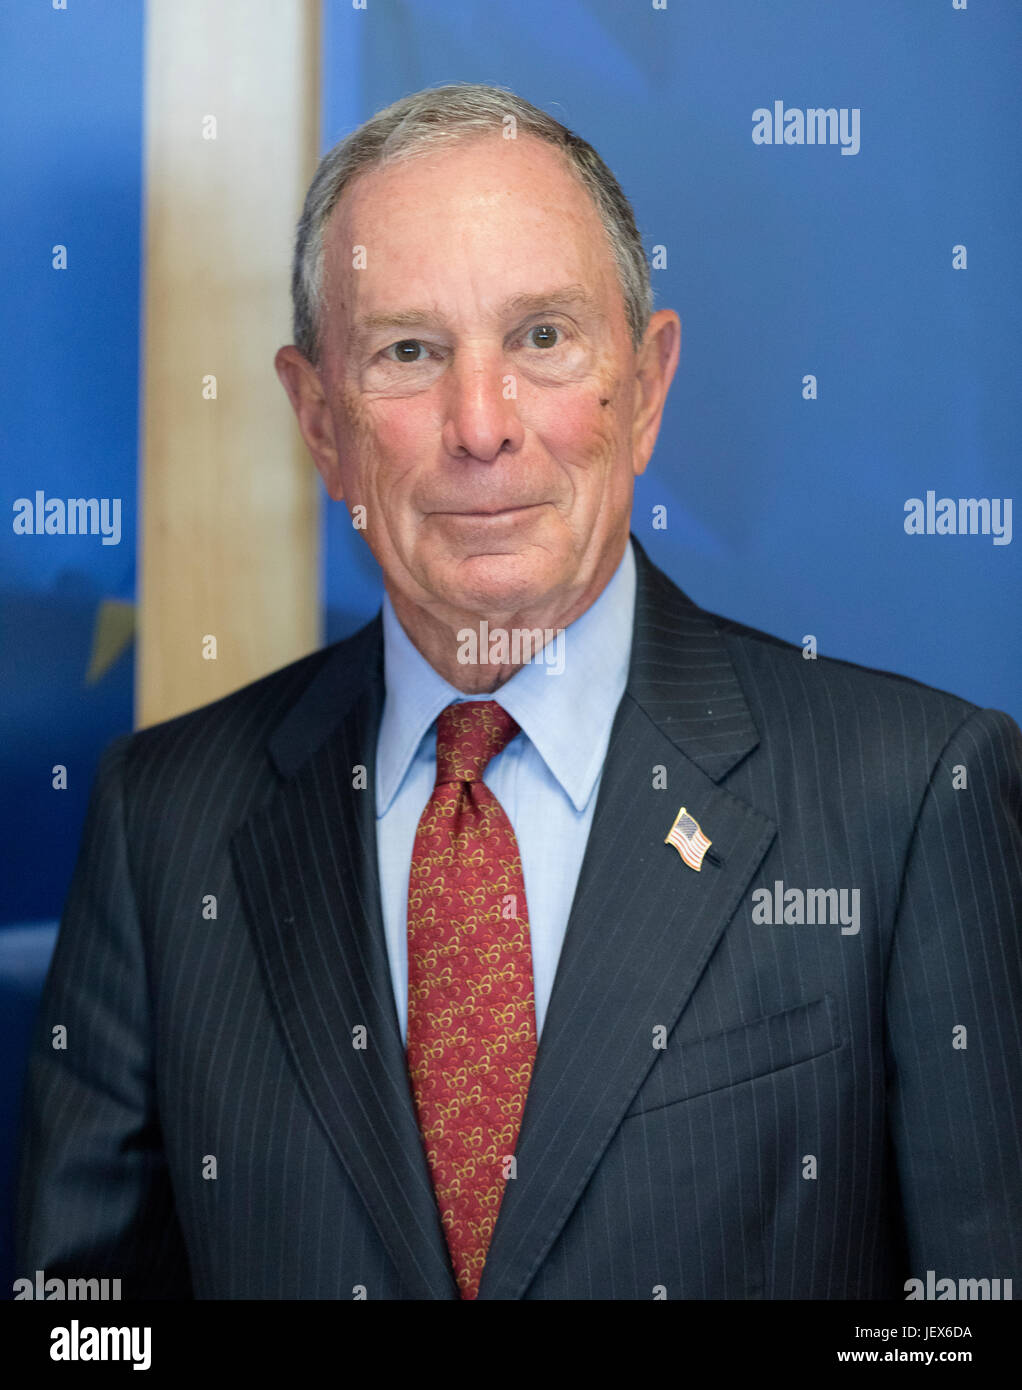 June 27, 2017 - Brussels, Belgium: EU Commission President (Unseen) welcomes the Special Envoy of the United Nations for Cities and Climate Change Michael Bloomberg (R) prior to a bilateral meeting in the Berlaymont, the EU Commission building. · NO WIRE SERVICE · Photo: Thierry Monasse/dpa Stock Photo